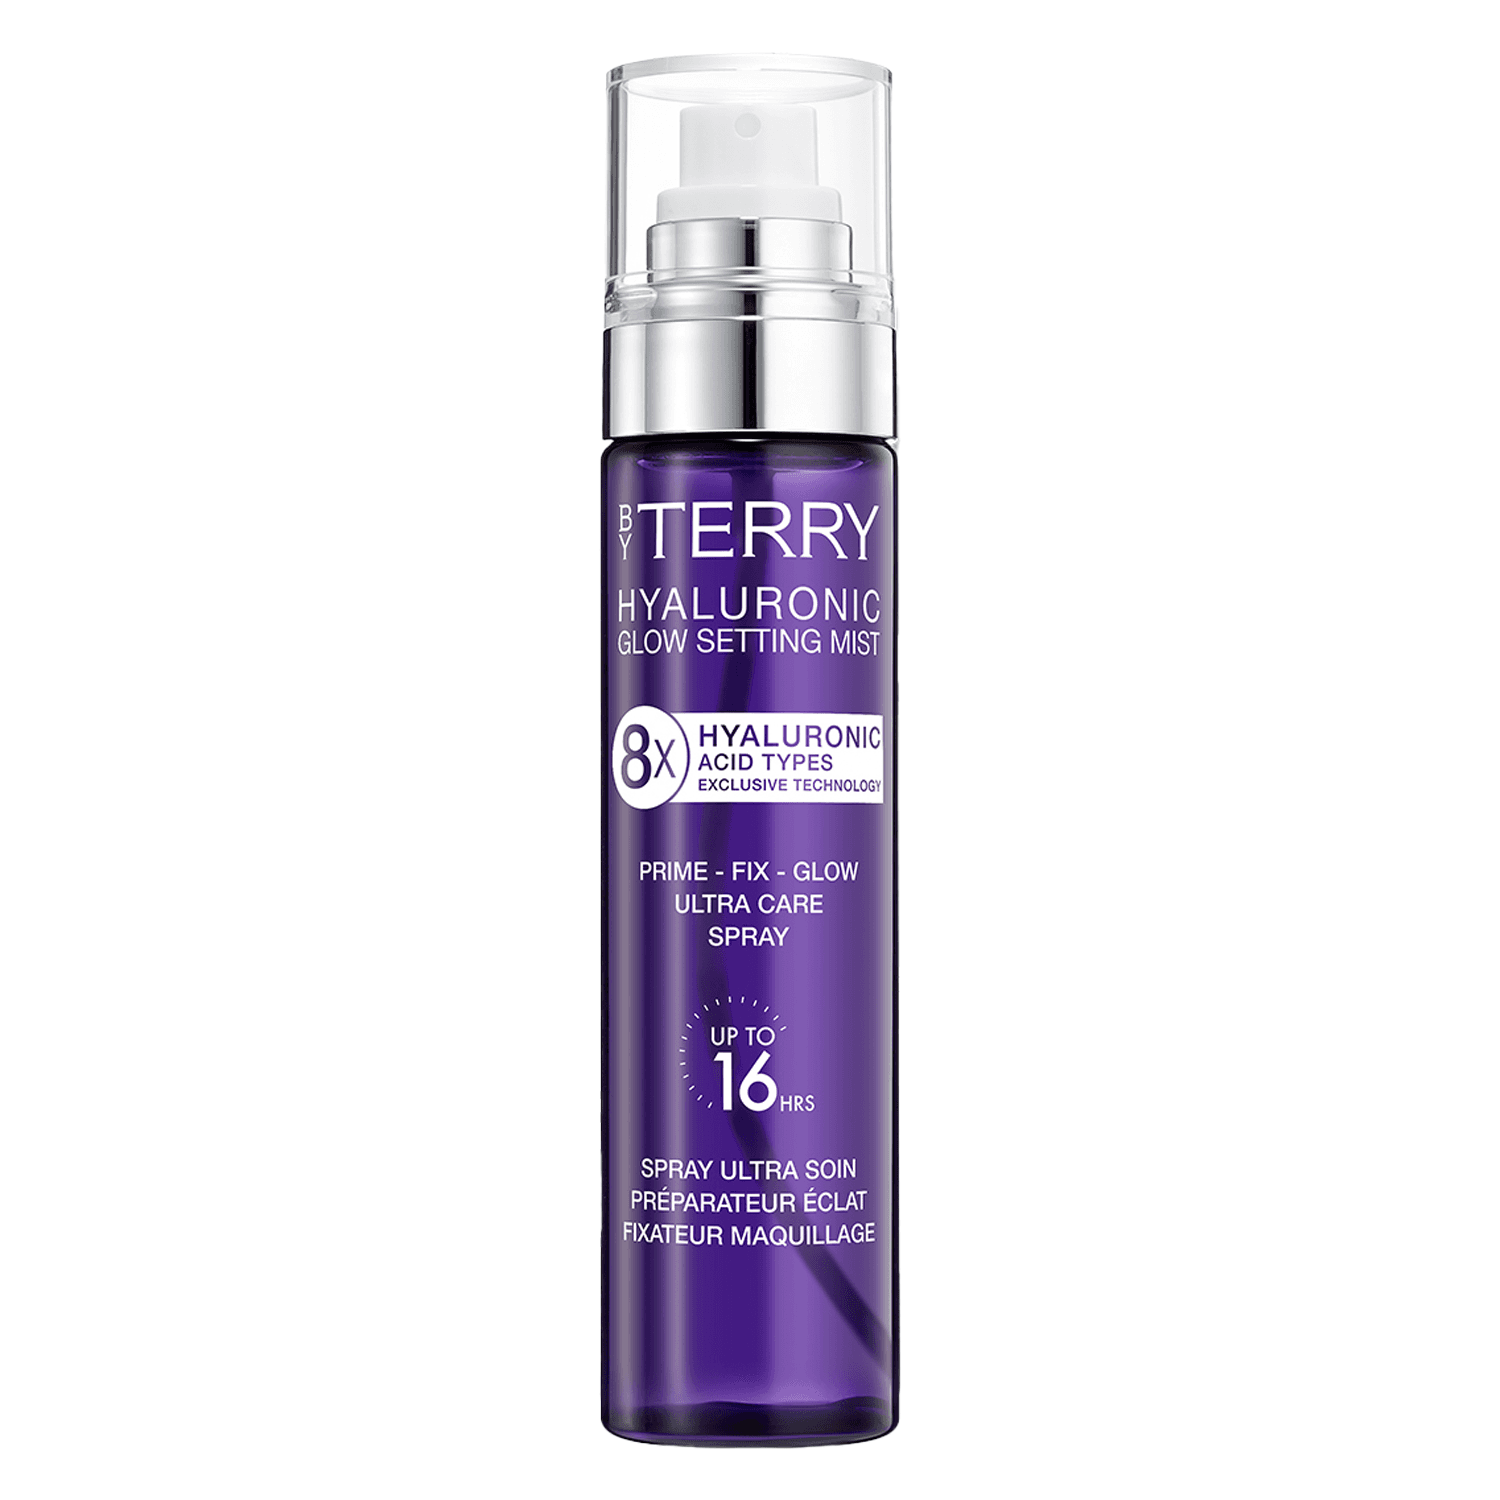 By Terry Primer - Hyaluronic Global Setting Mist Spray